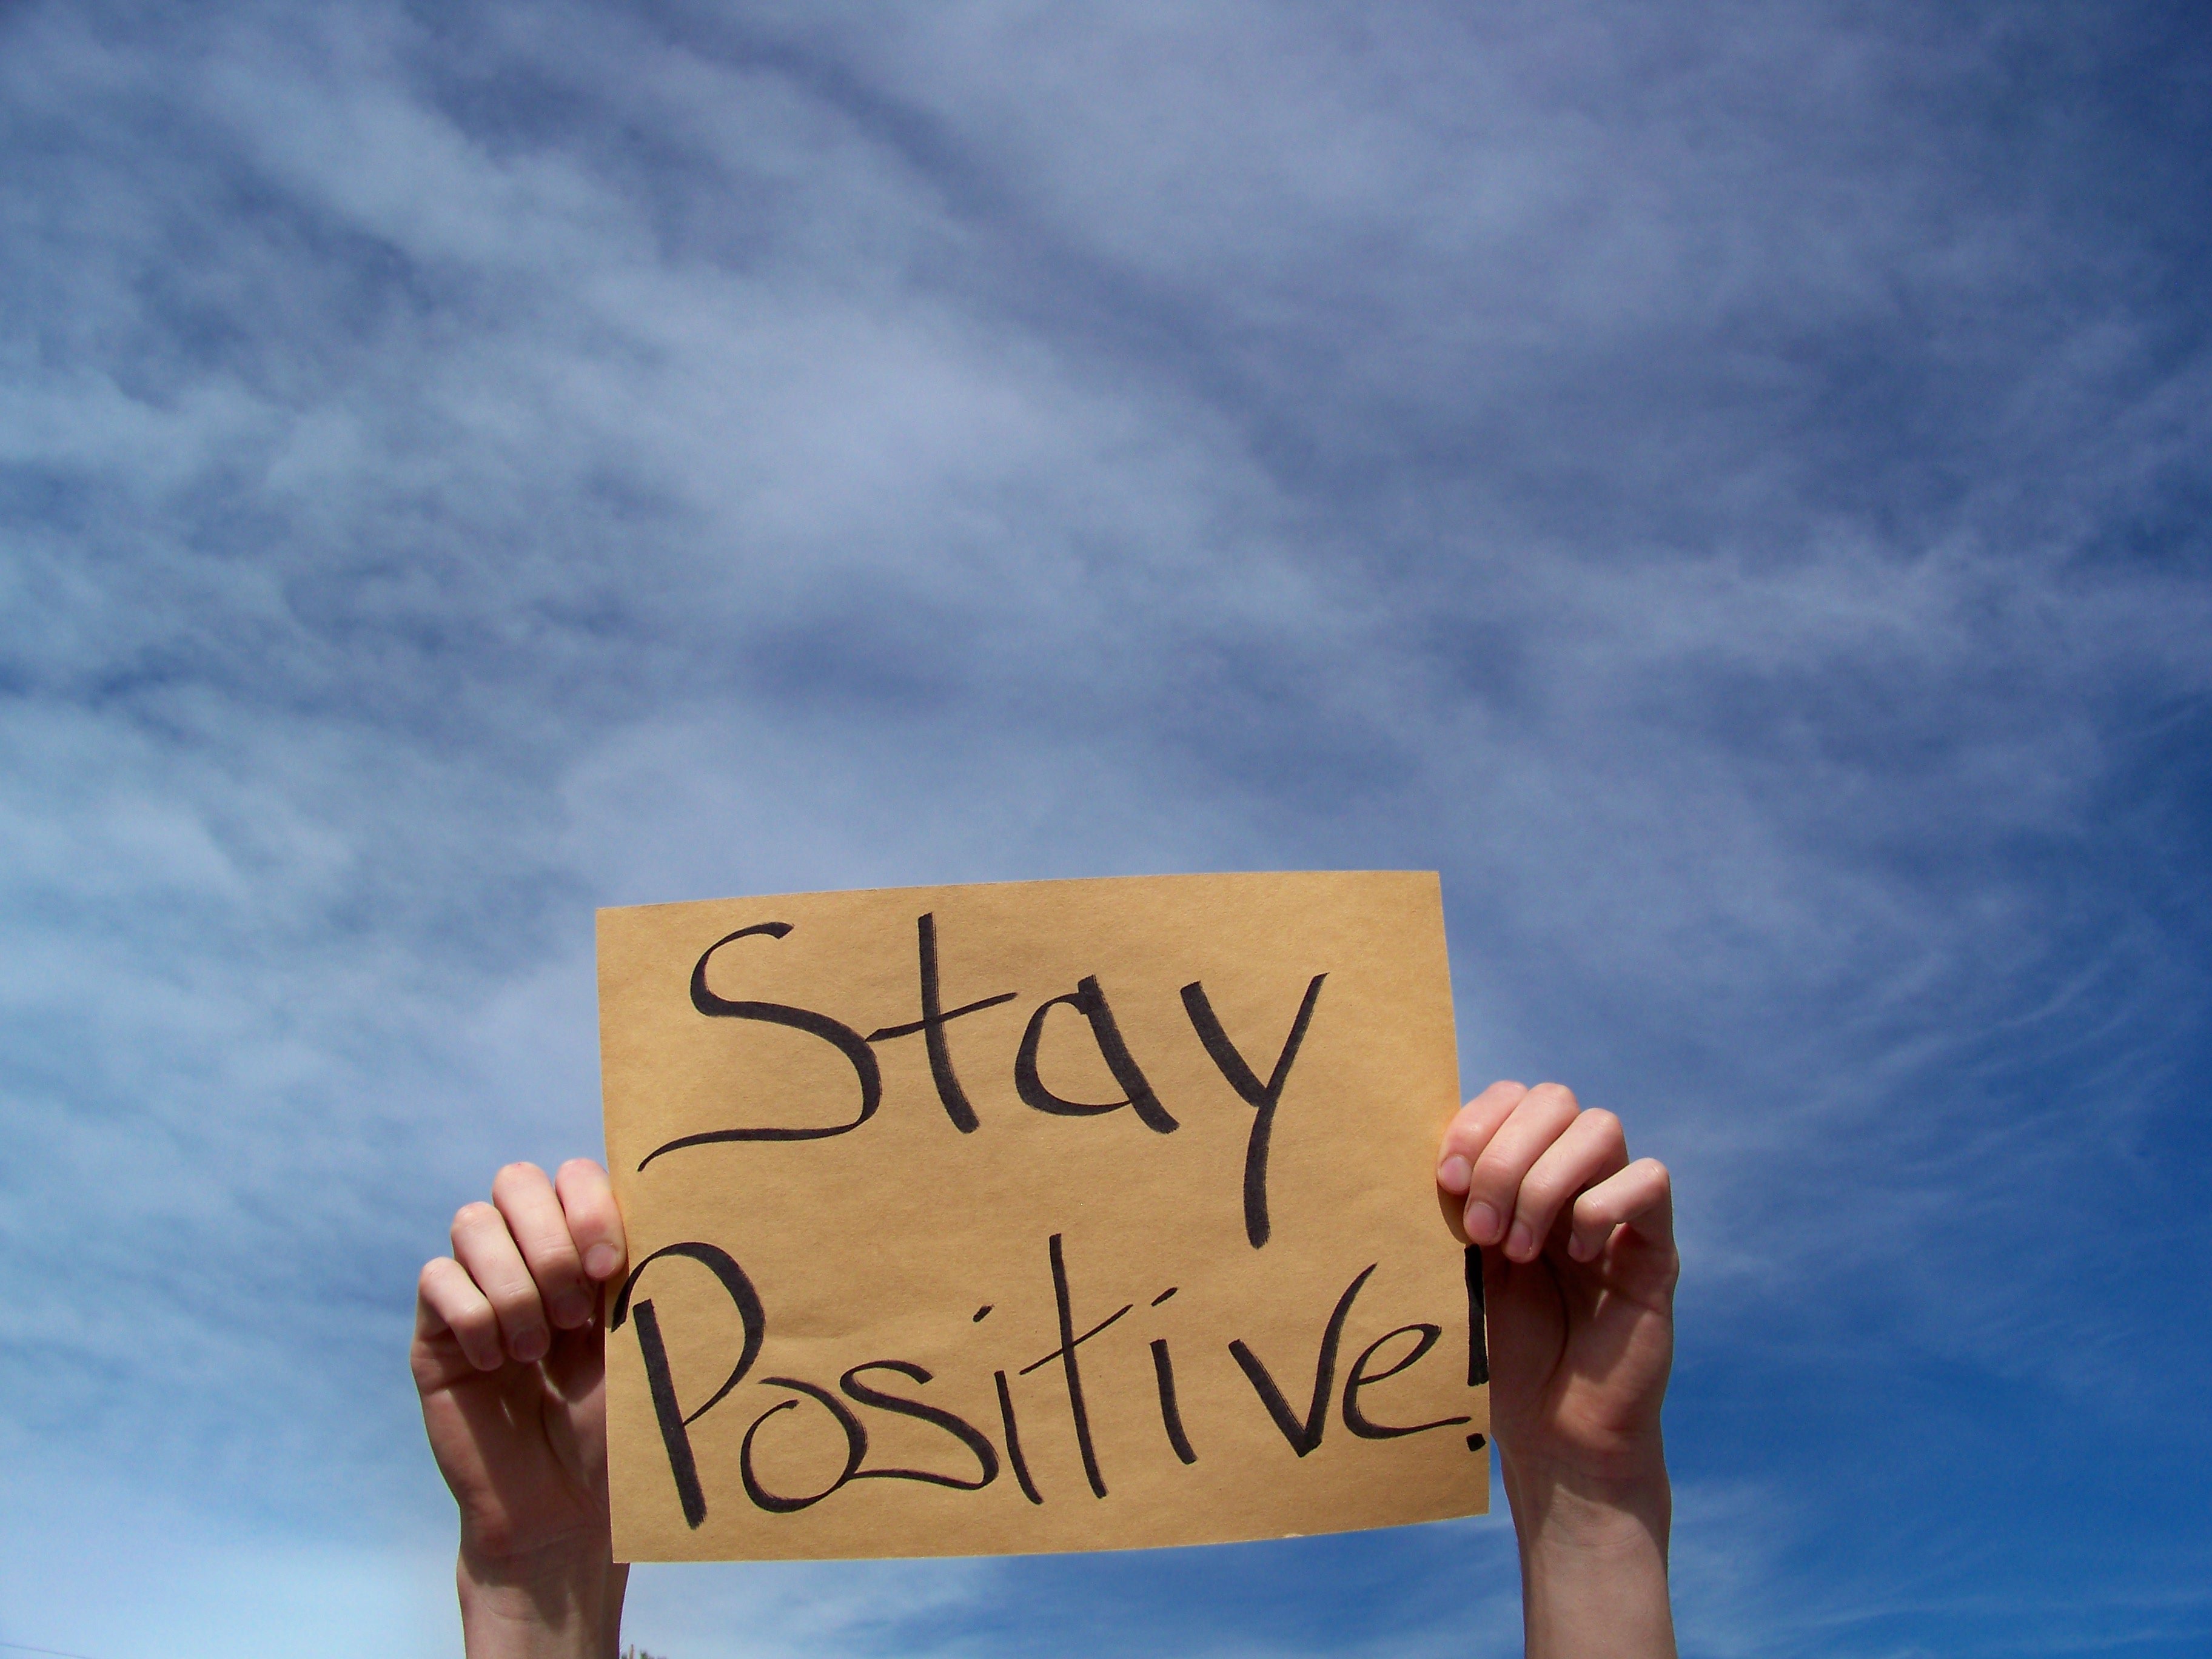 You can live your life. Positive картинки. Think positive картинки. Stay positive картинки. Stay positive обои.